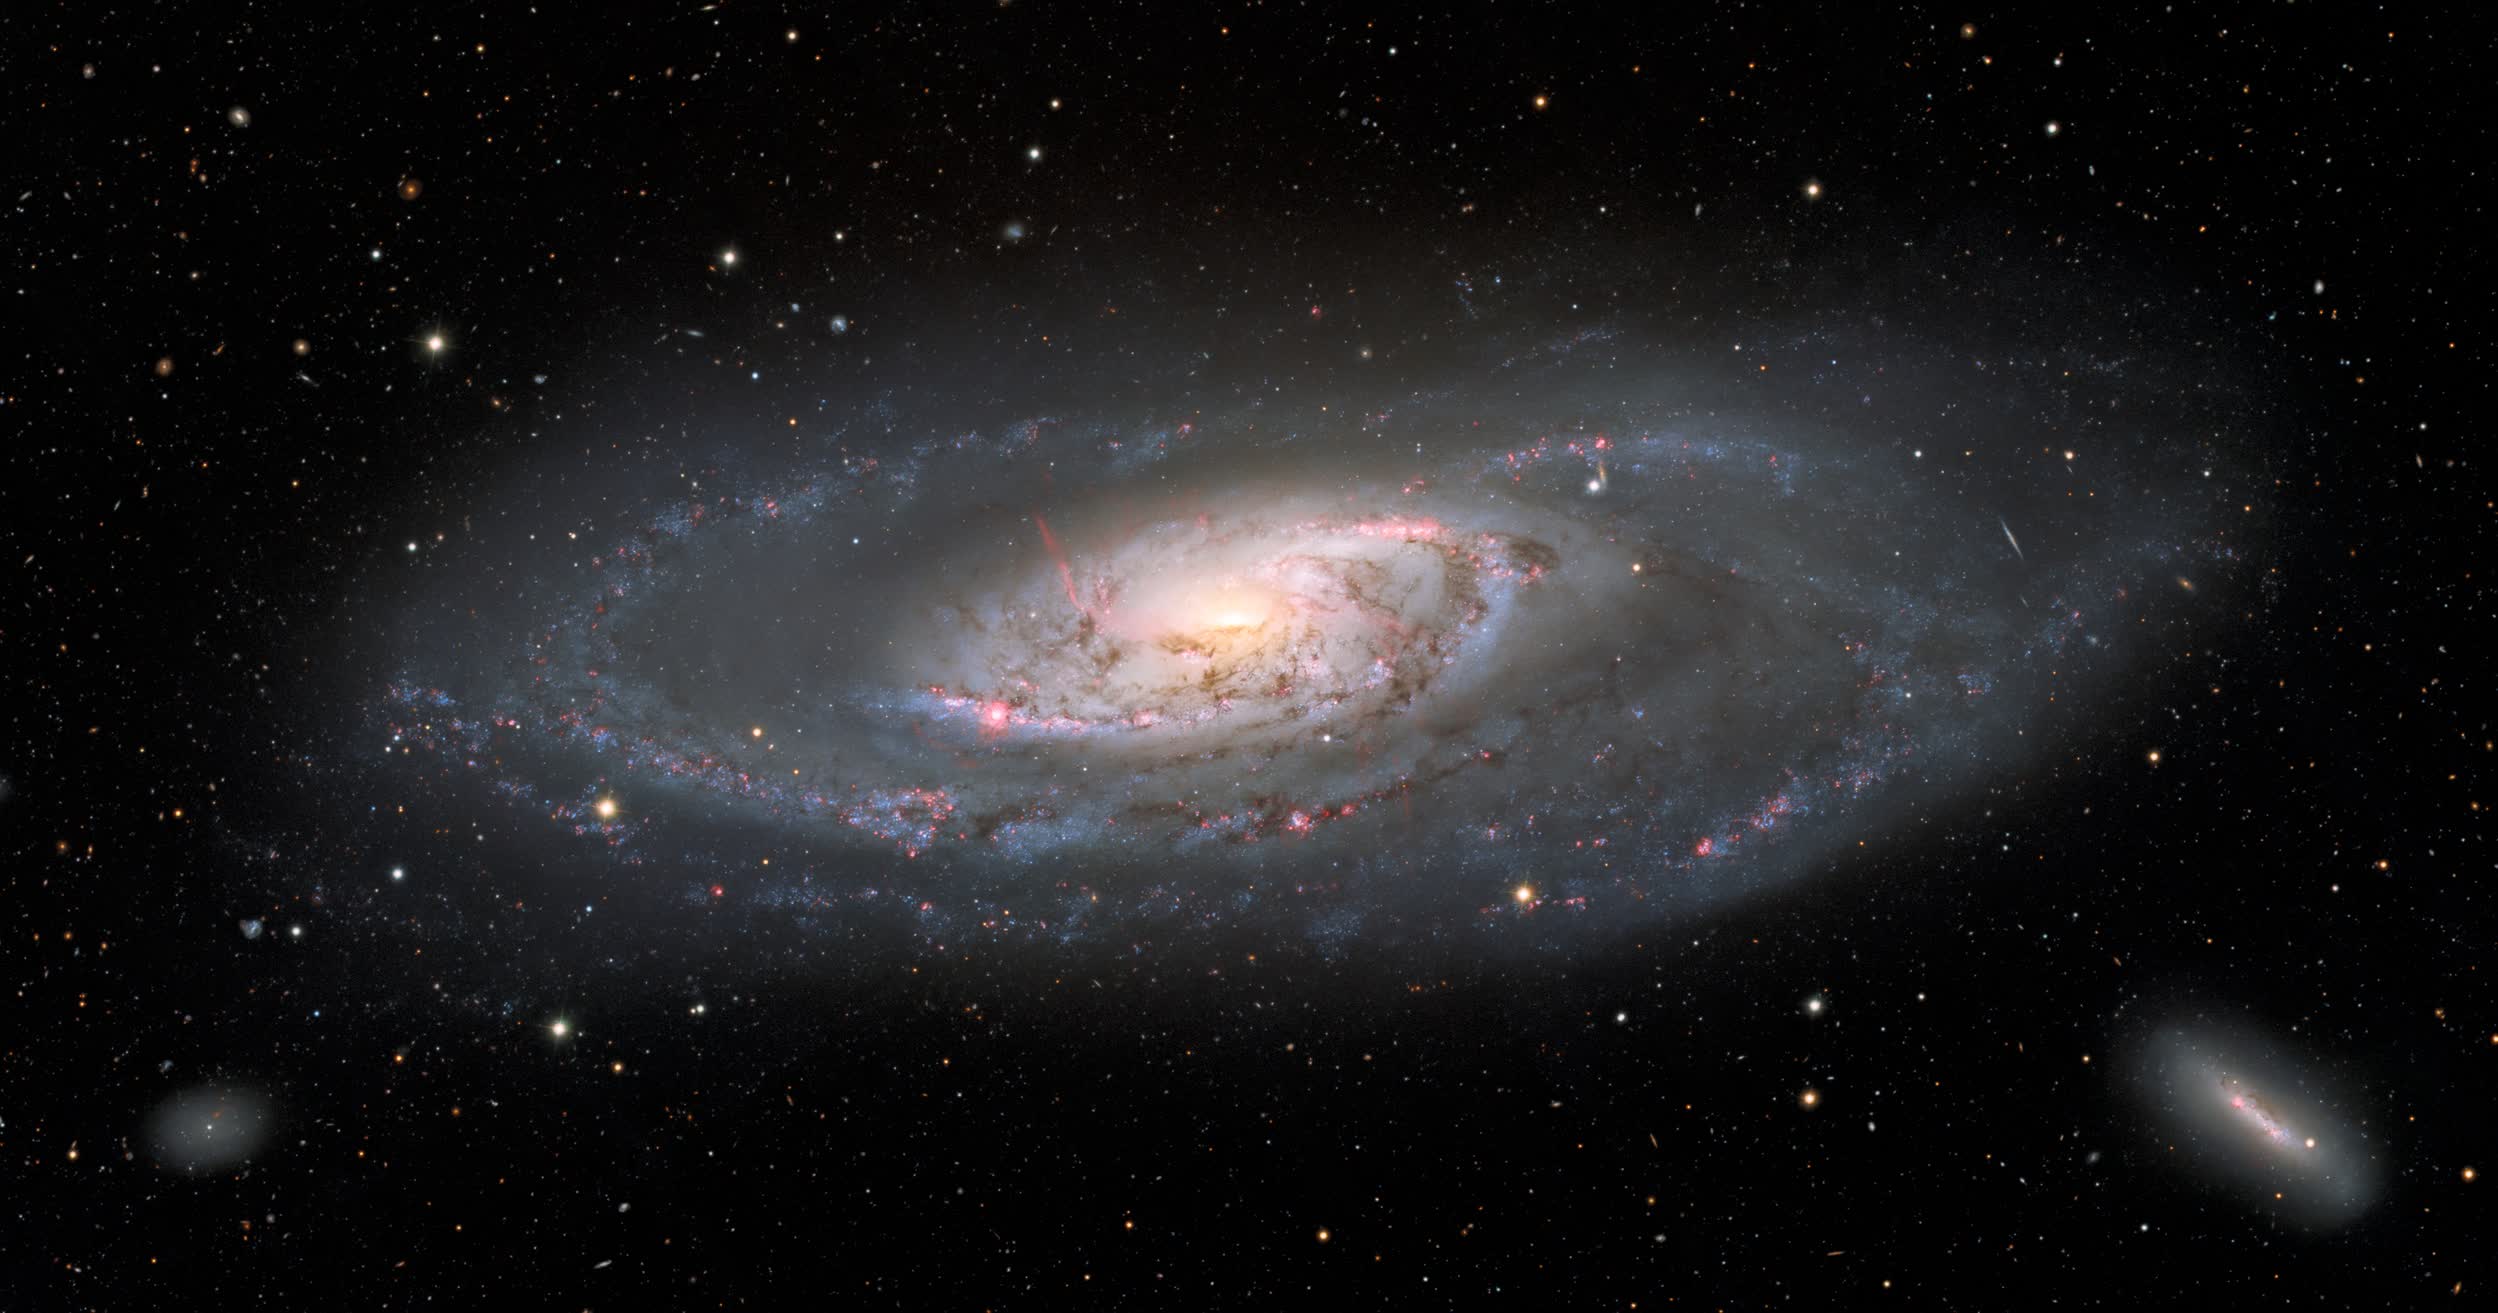 Striking image highlights the entirety of galaxy Messier 106